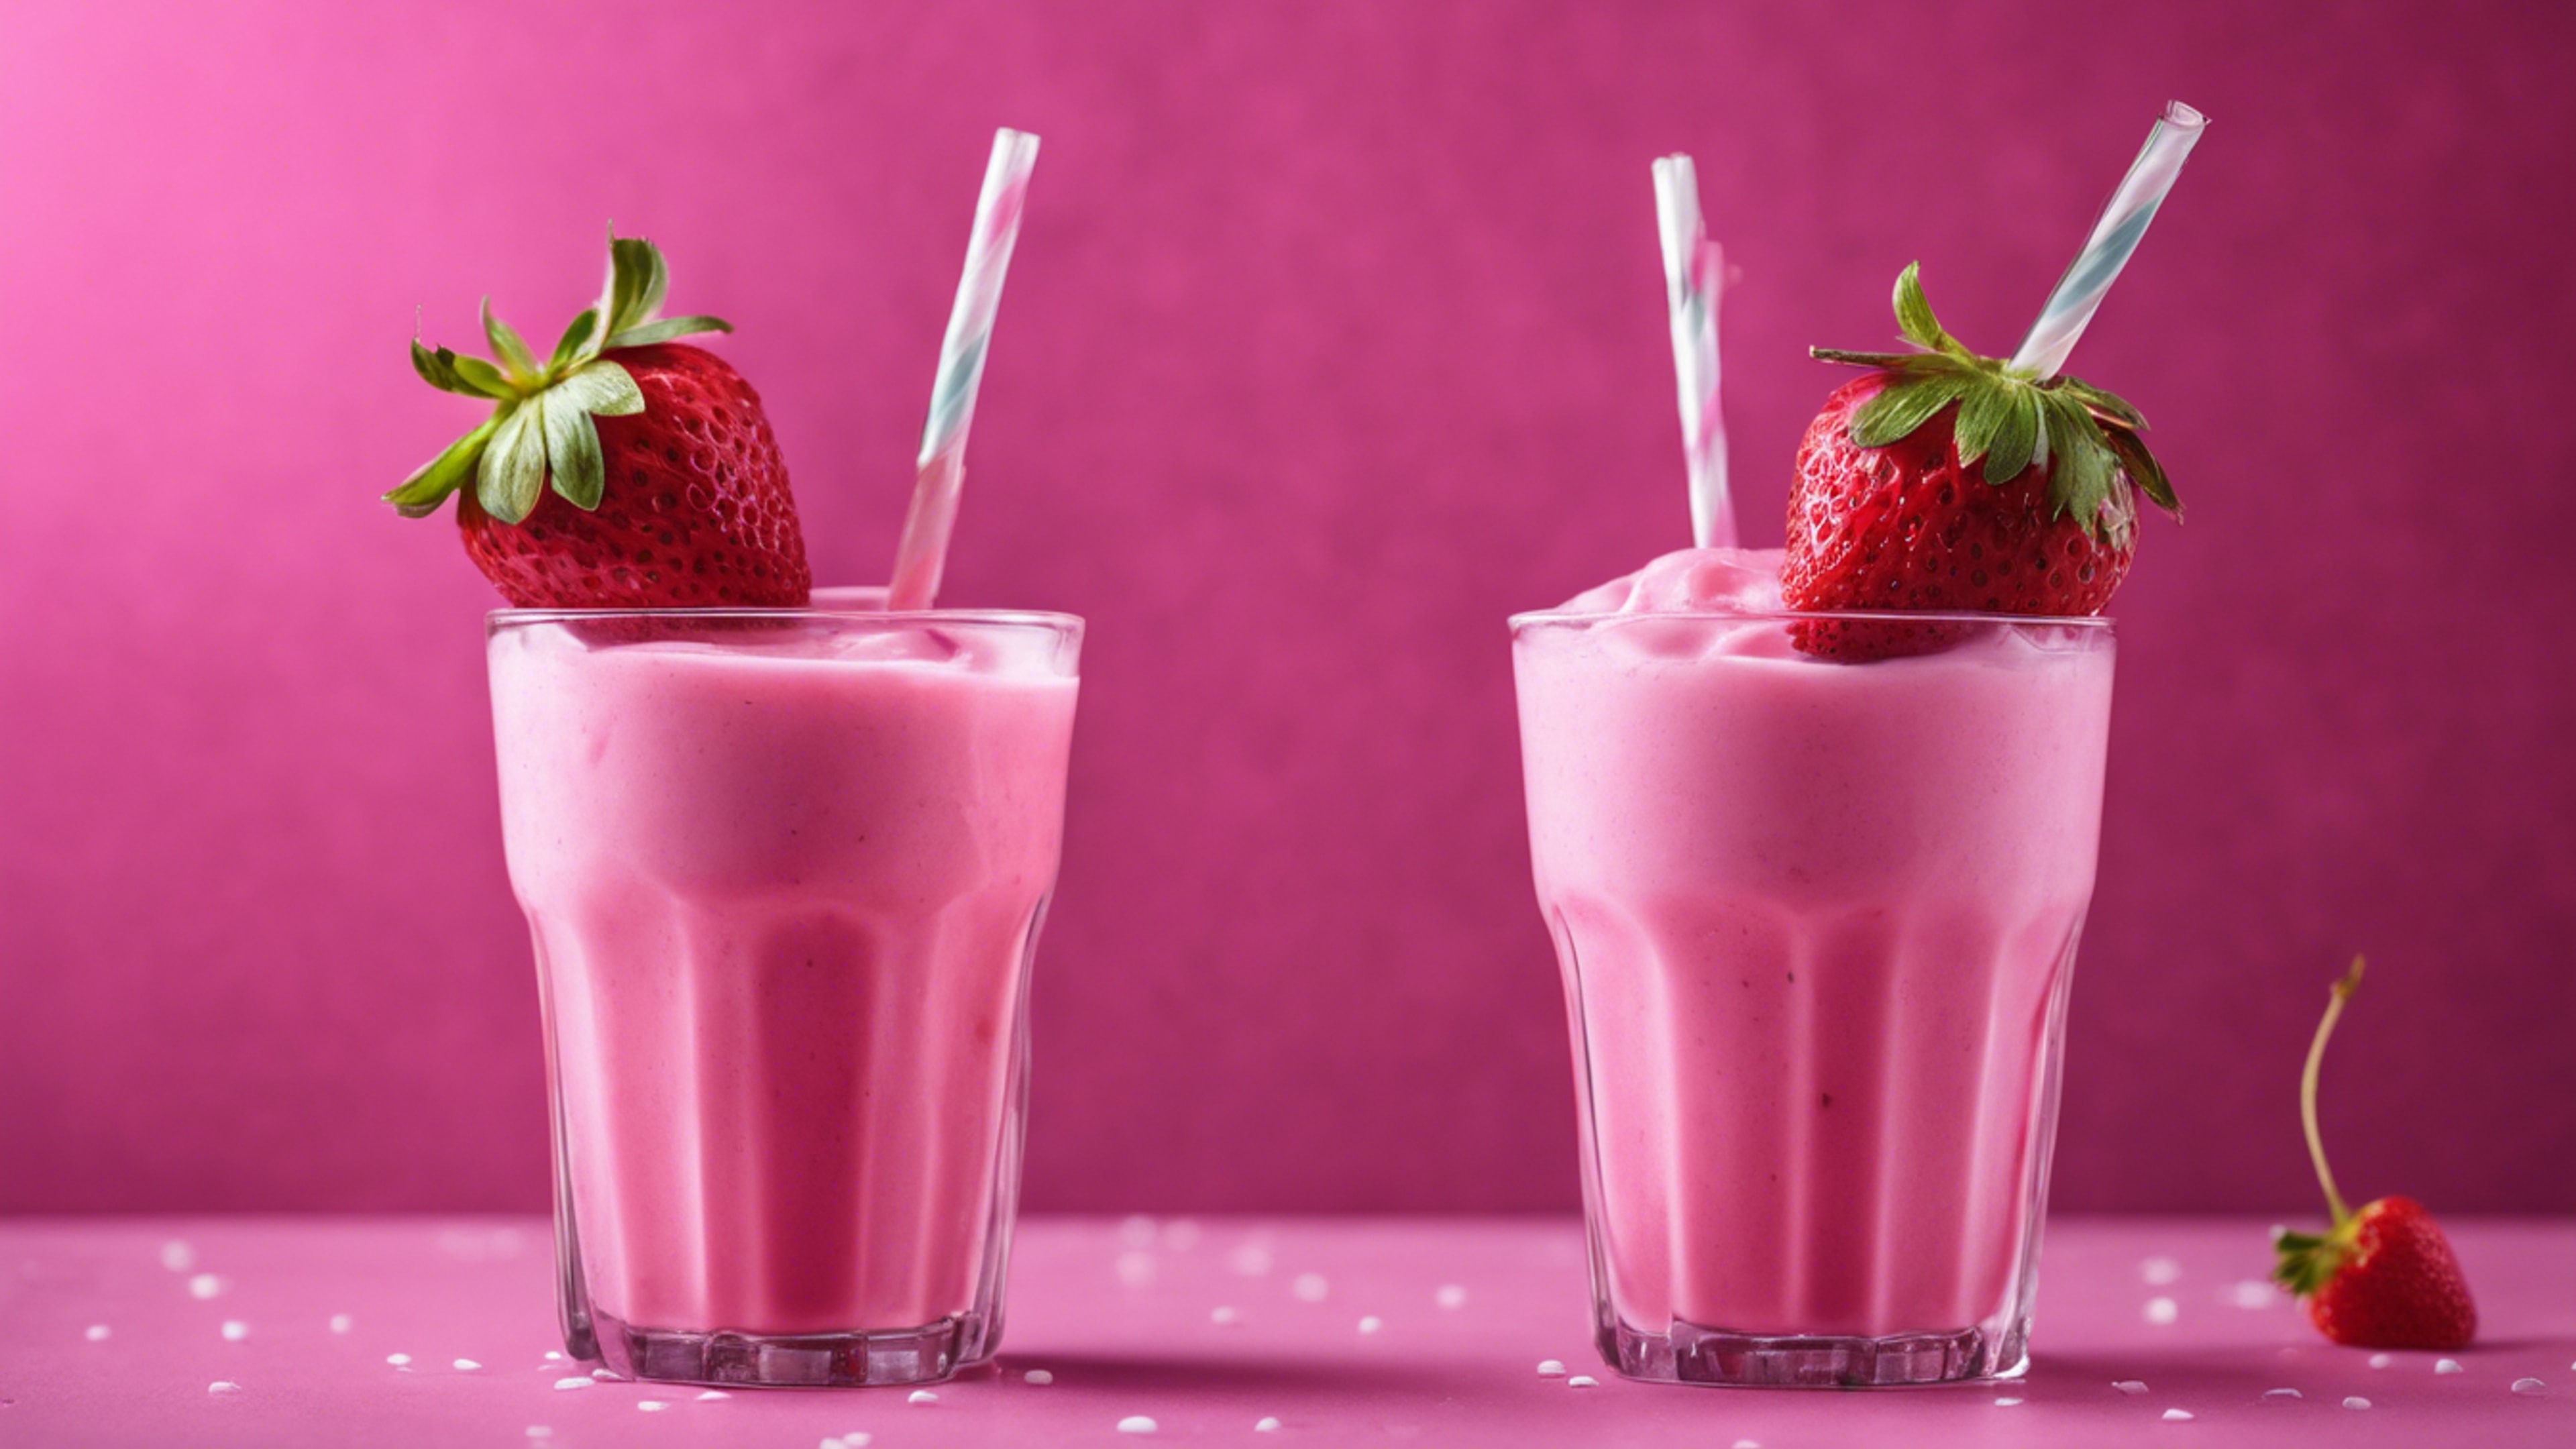 Two glasses filled with bright pink strawberry milkshake garnished with straws and cherries.壁紙[367e513037cf4f879d8a]